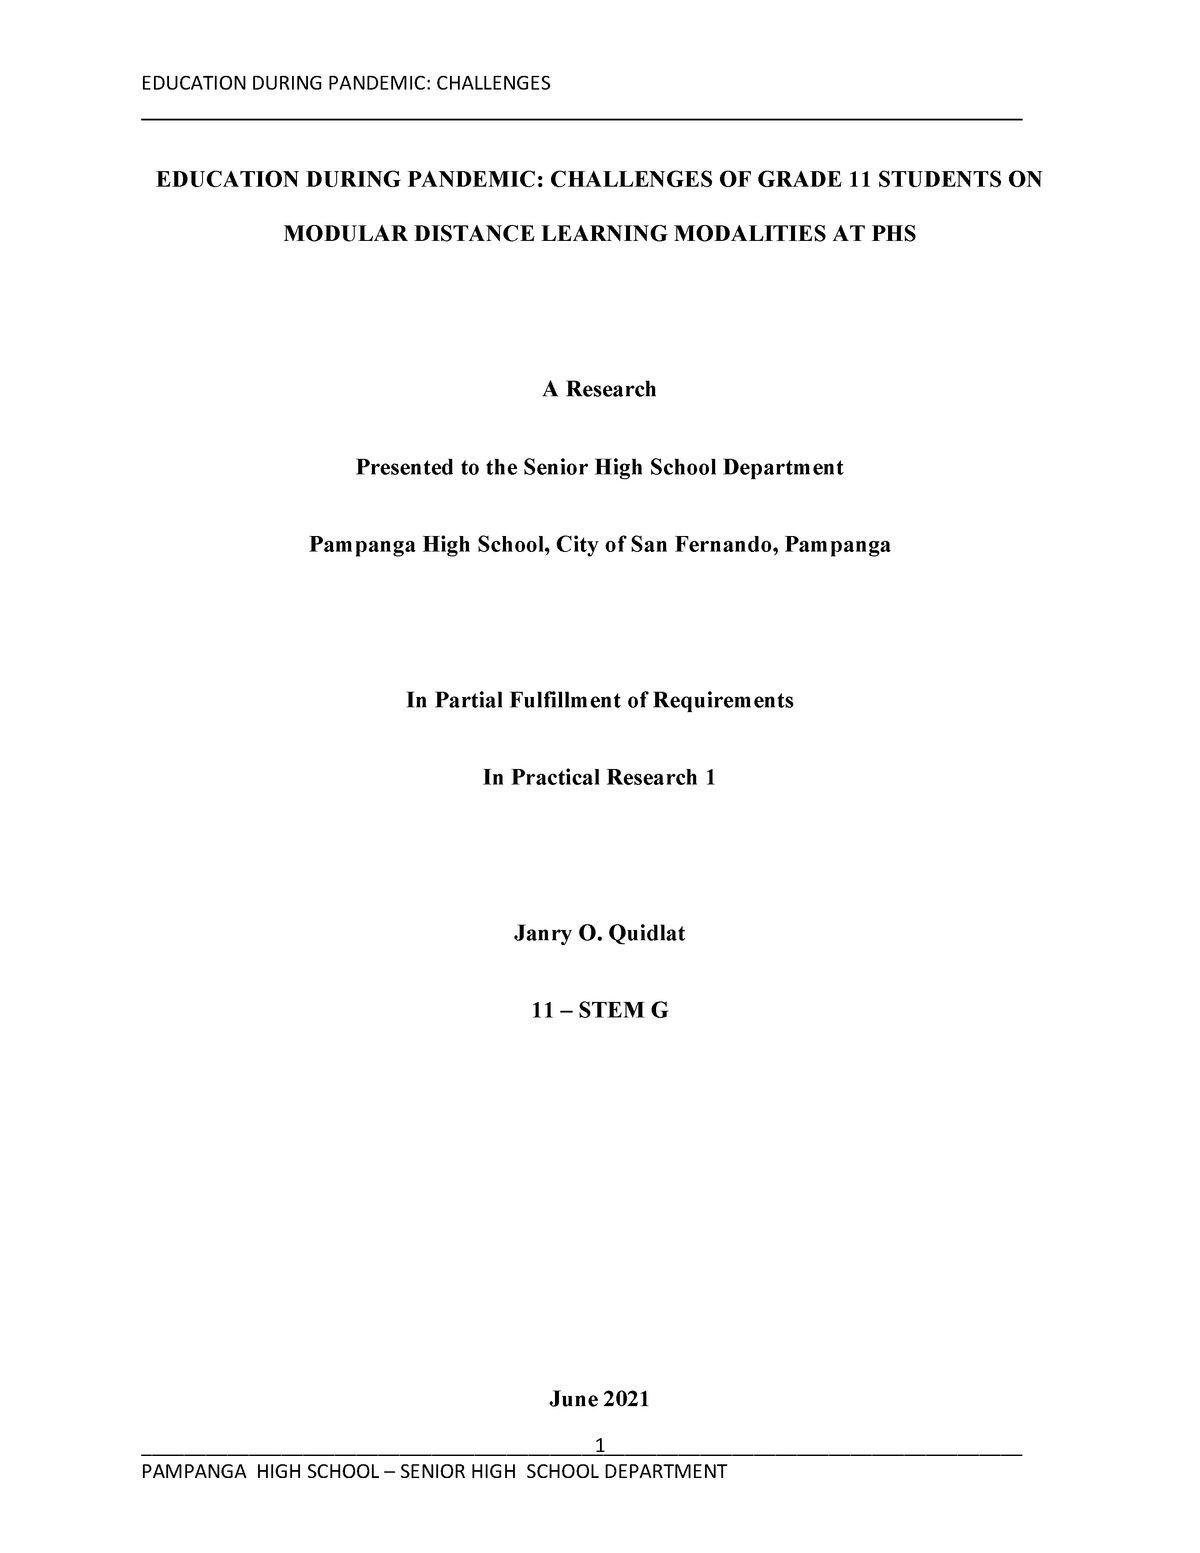 thesis about distance learning in the philippines